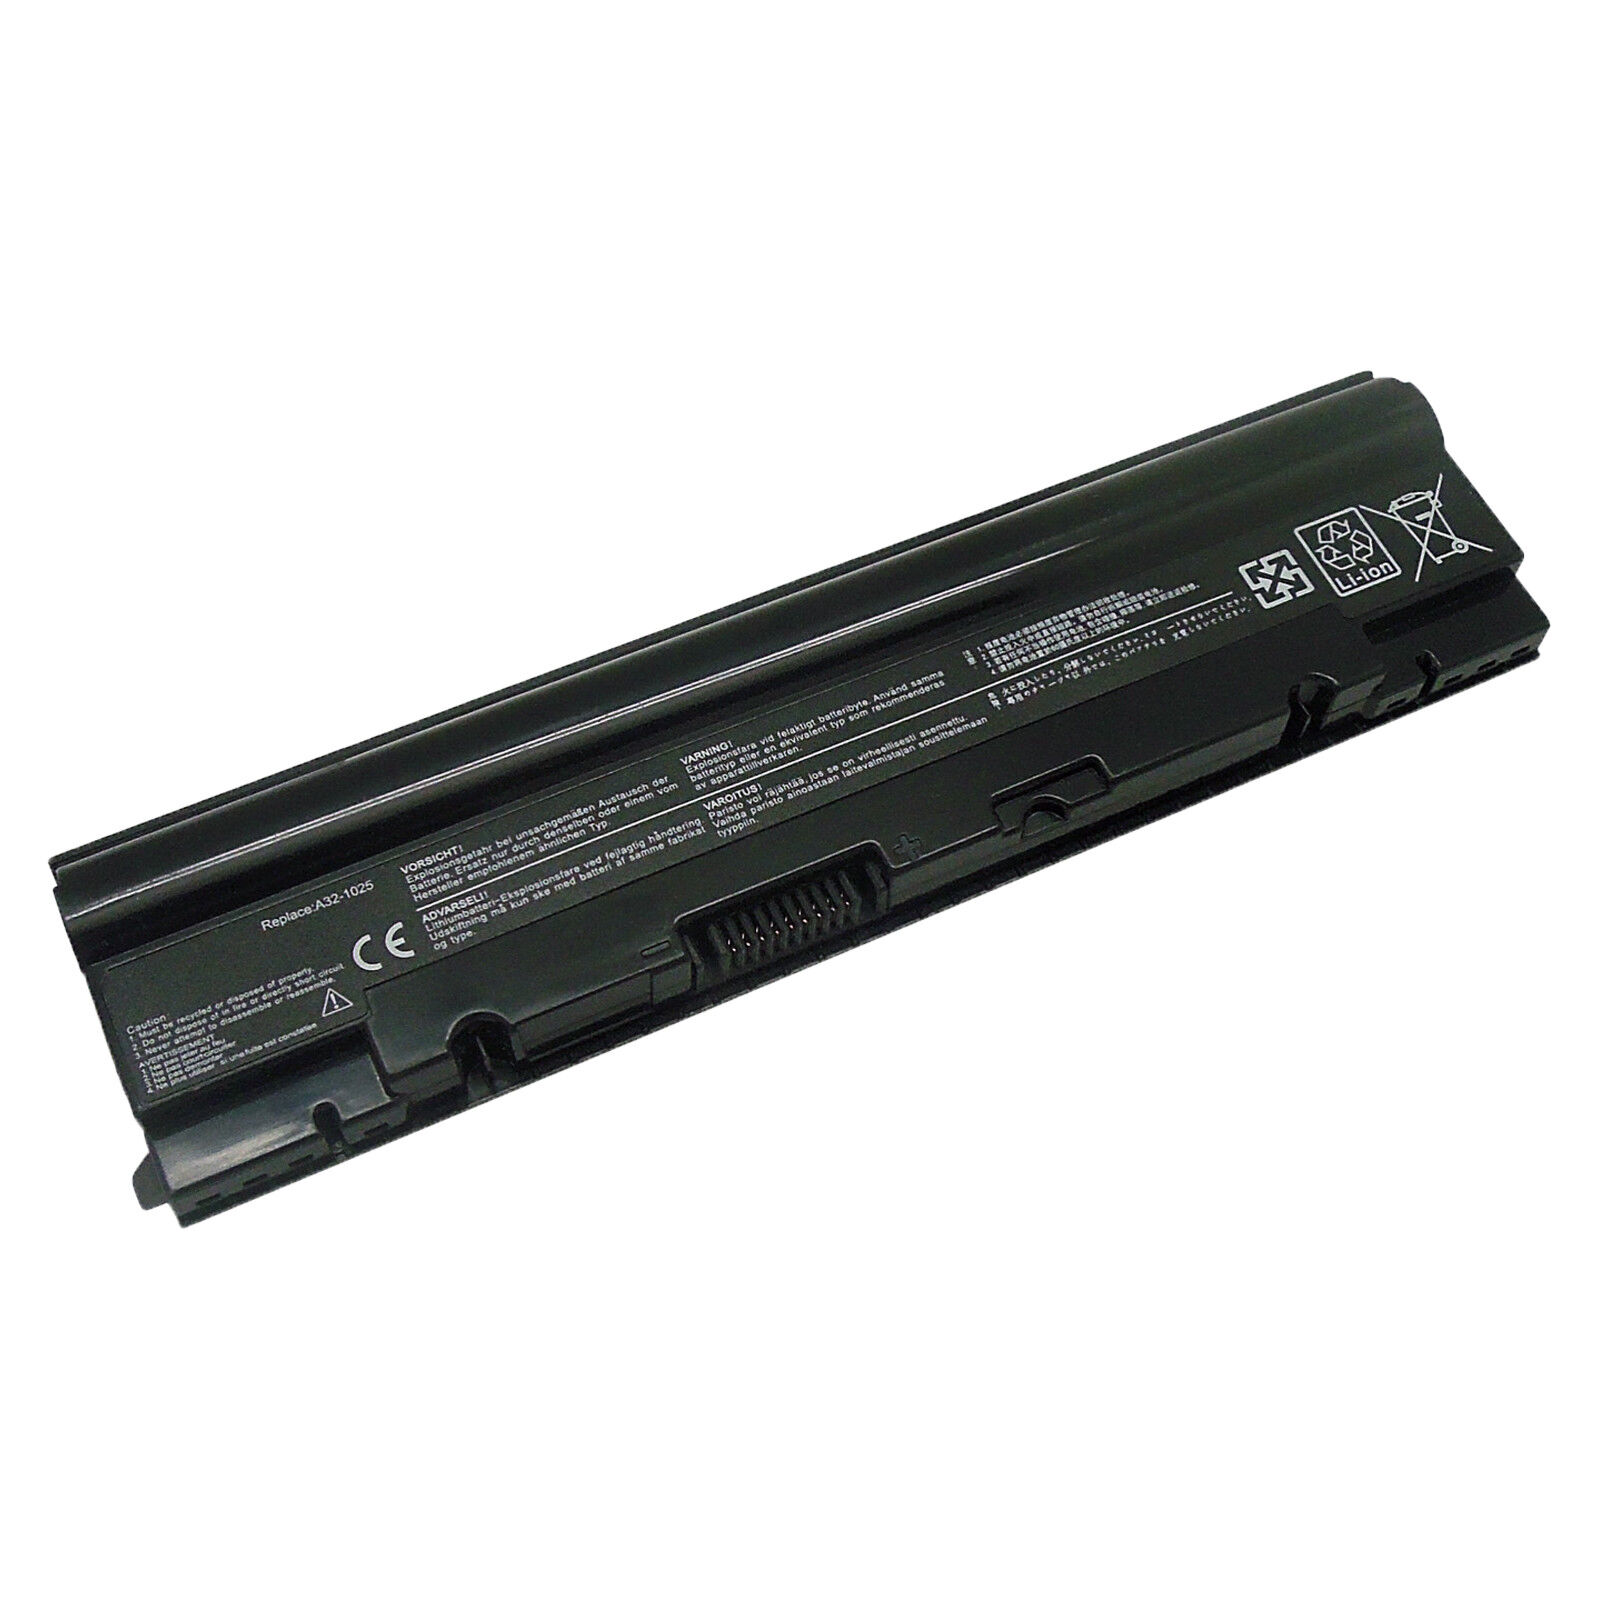 Battery for ASUS Eee PC 1025C